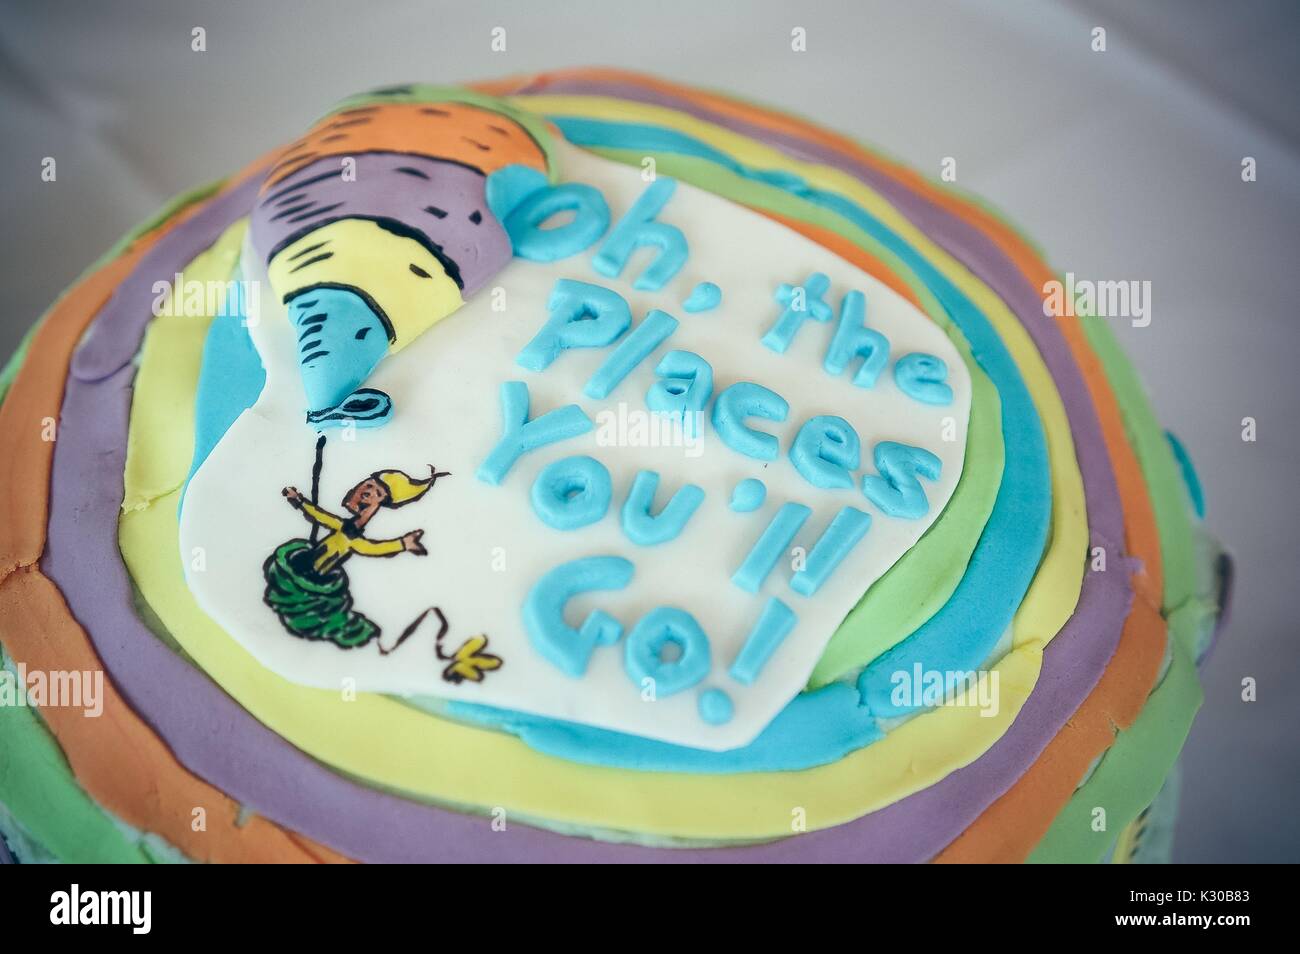 Submission for Read It and Eat It contest, and edible book festival at Milton S Eisenhower Library, Johns Hopkins University, showing a cake decorated with the cover from Dr Seuss's 'Oh, the Places You'll Go, ' with text and hot air balloon, Baltimore, Maryland, April, 2016. Courtesy Eric Chen. Stock Photo